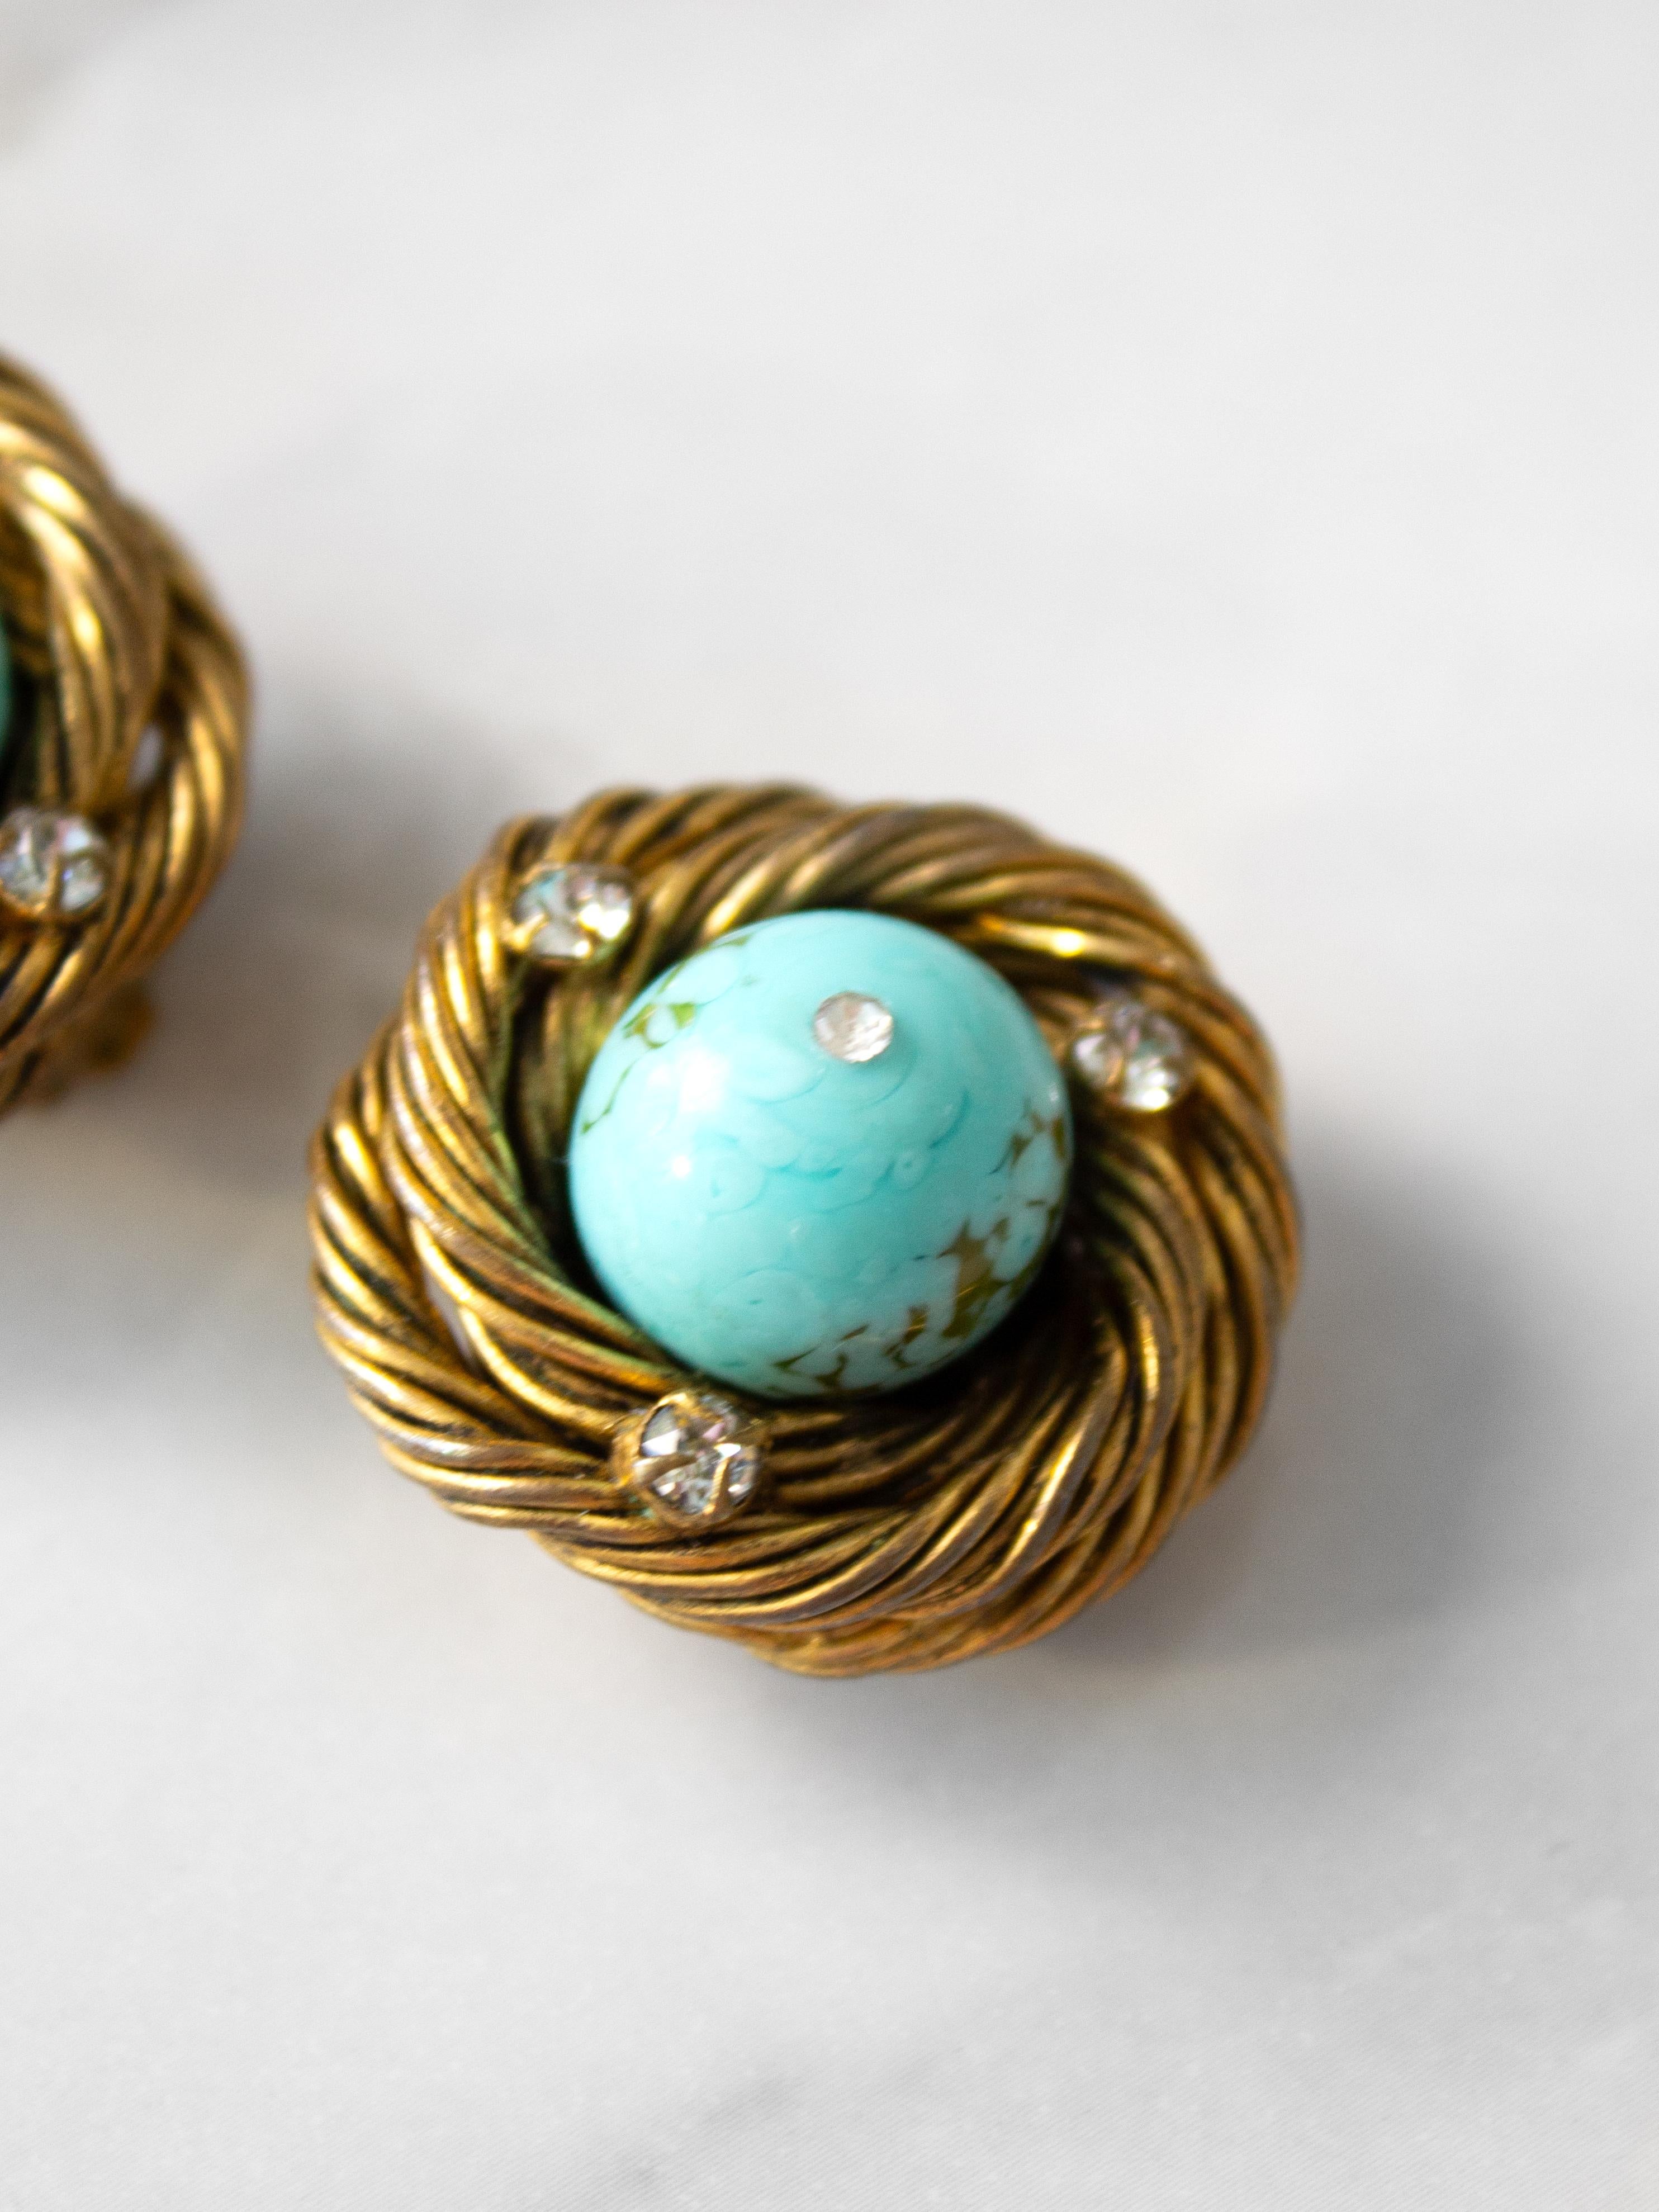 Chanel 1960s Gilded Turquoise Birds Nest Pate De Verre Goossens Clip-On Earrings In Good Condition For Sale In Jersey City, NJ